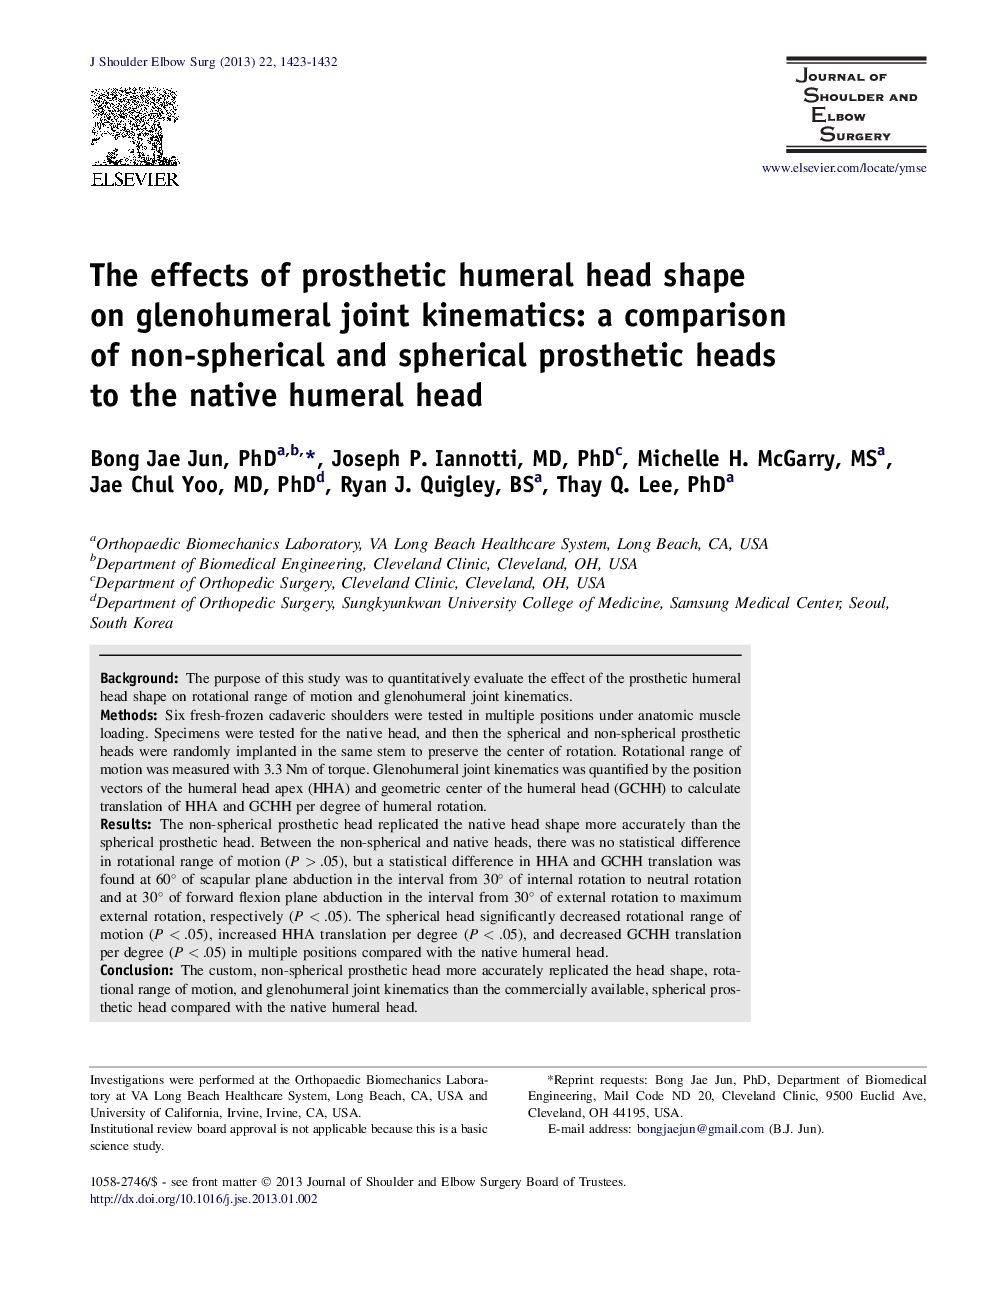 The effects of prosthetic humeral head shape on glenohumeral joint kinematics: a comparison of non-spherical and spherical prosthetic heads to the native humeral head 